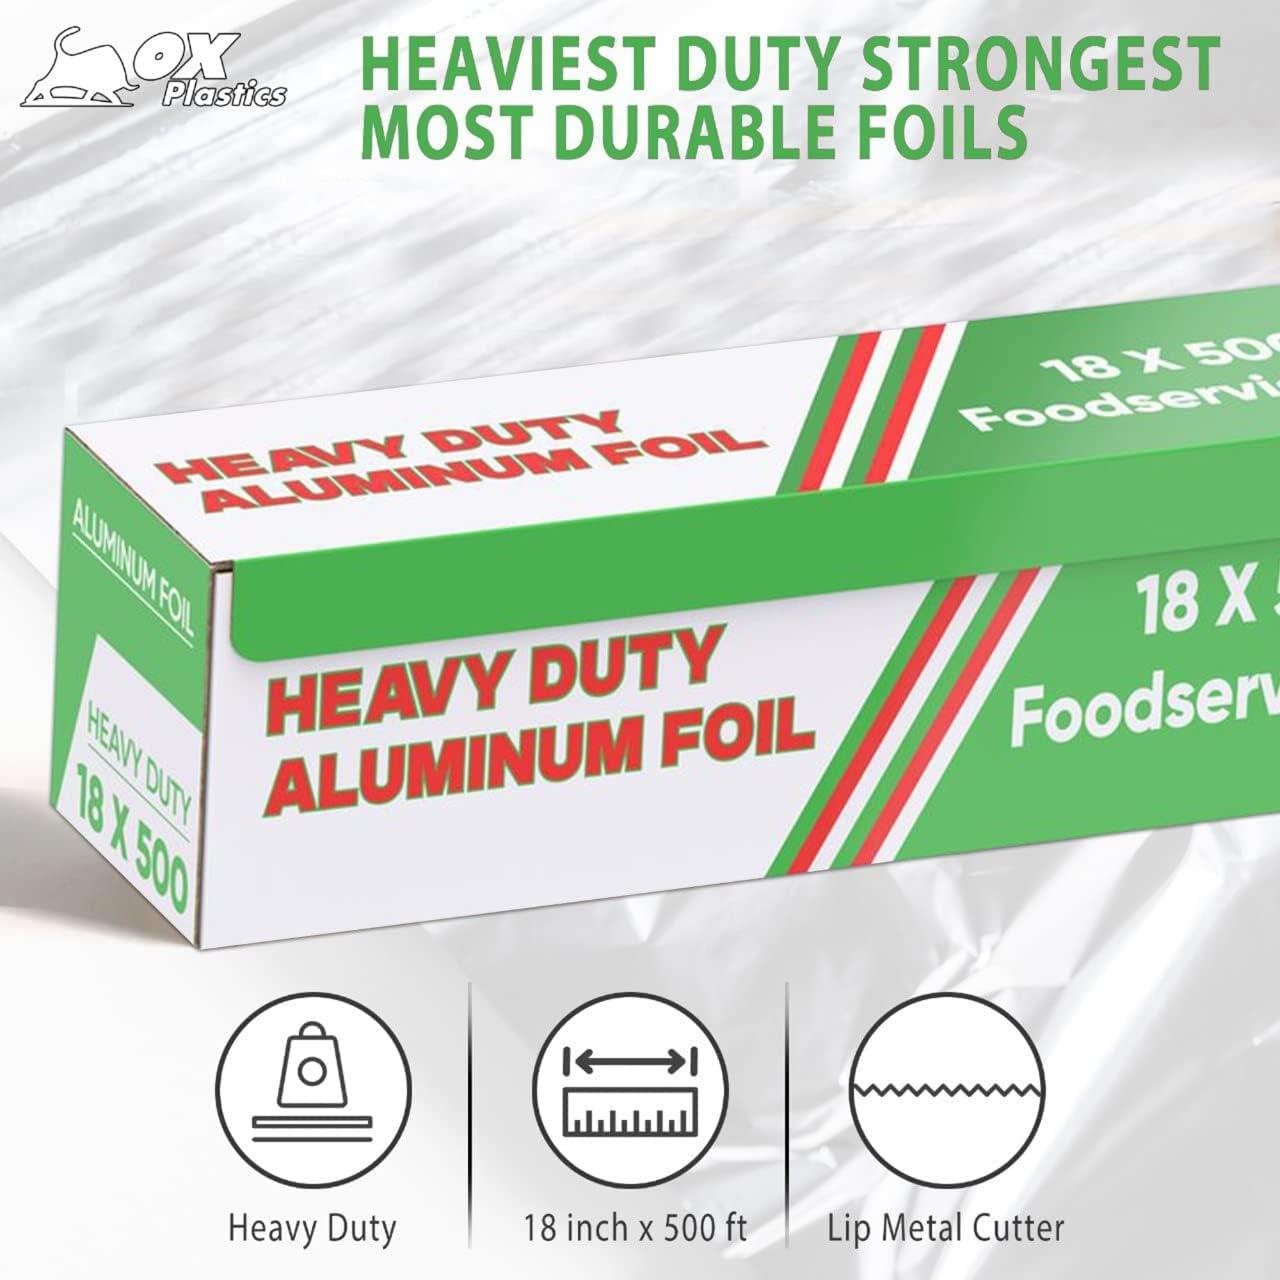 Heavy Duty Food Service Aluminum Foil Roll 18 inch x 500 FT Sturdy  Corrugated Cutter Box - Great for Grilling, Kitchen Wrap, Foil Wrap,  Cooking